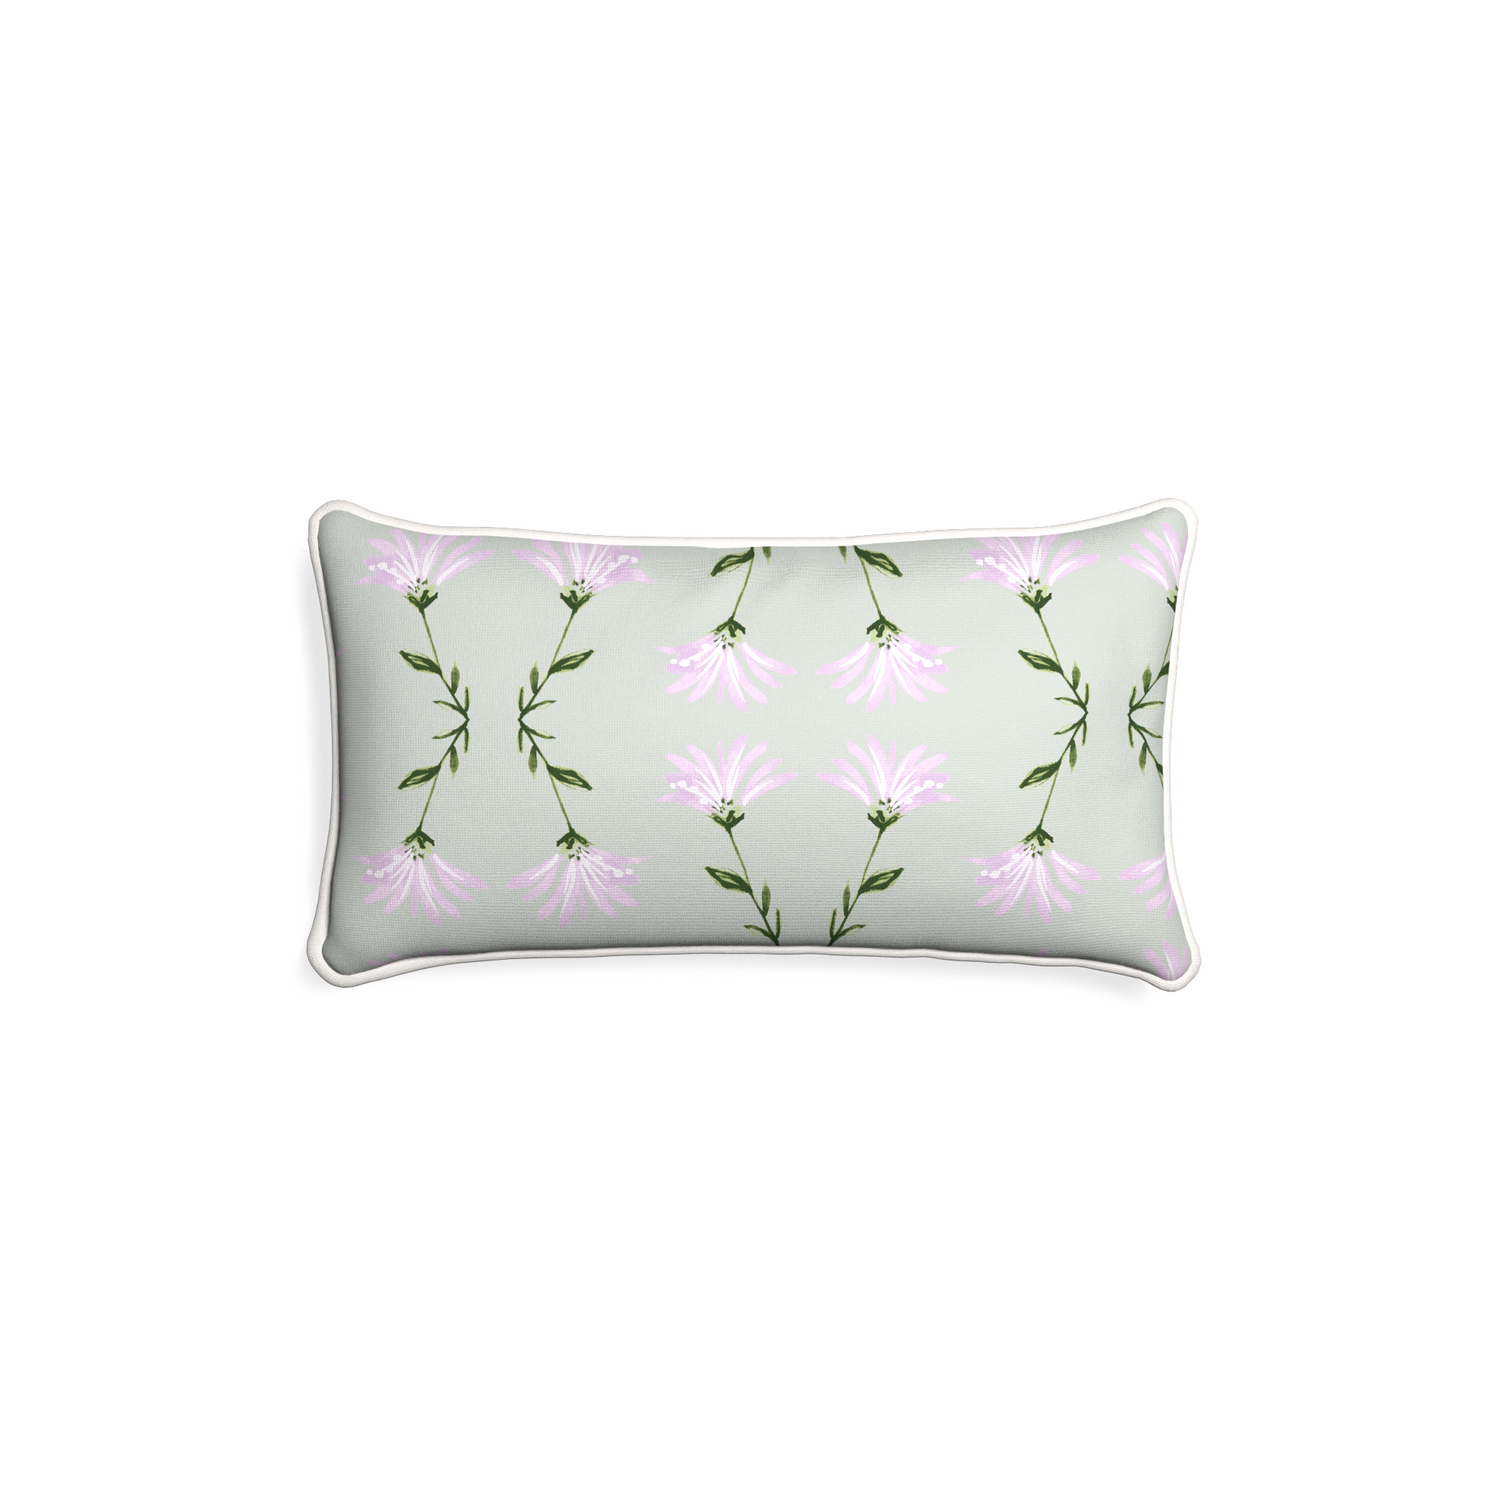 Lumbar marina sage custom pillow with snow piping on white background